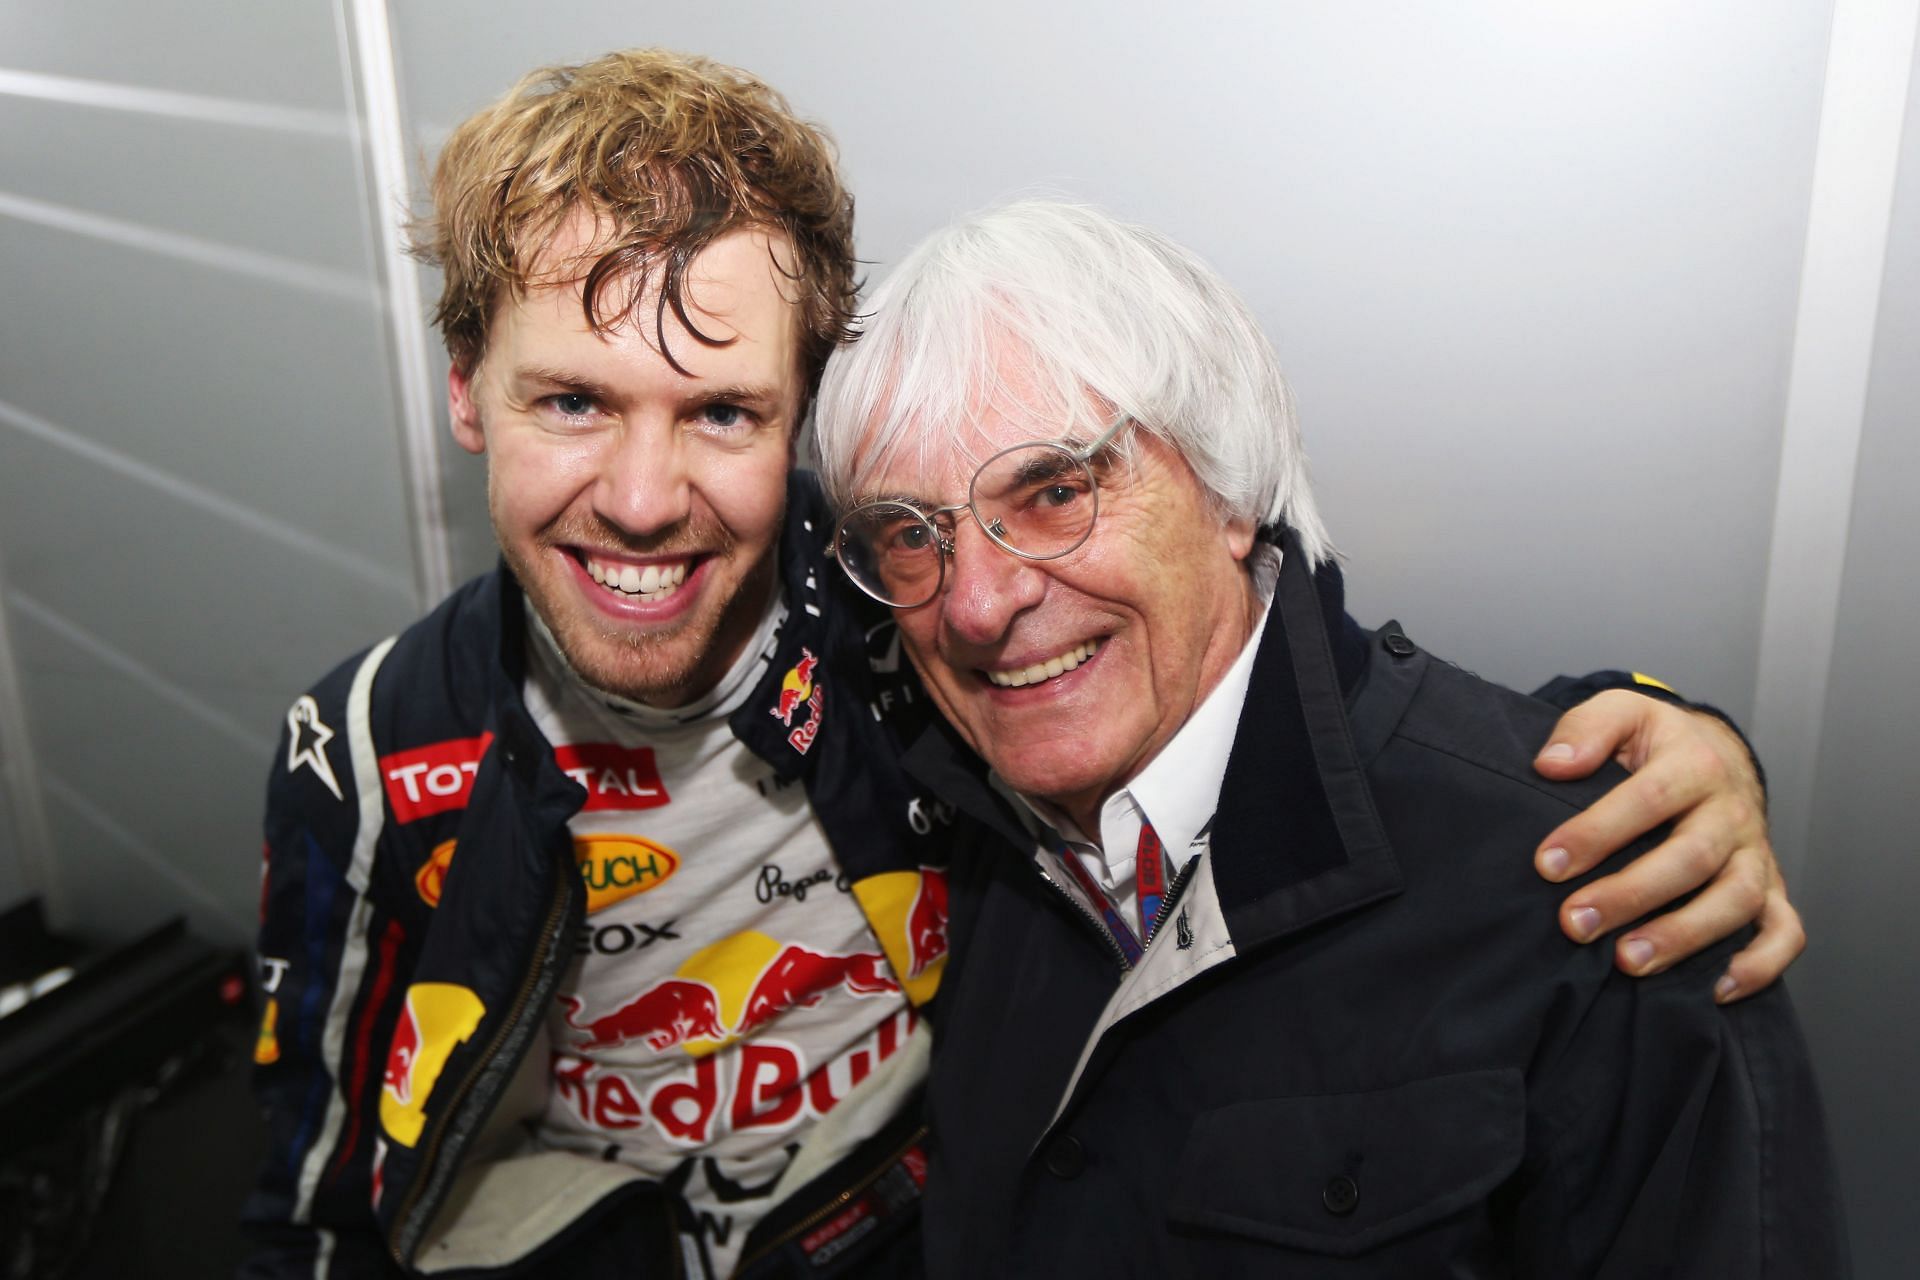 Sebastian Vettel with F1 supremo Bernie Ecclestone after clinching the 2012 title (Photo by Mark Thompson/Getty Images)